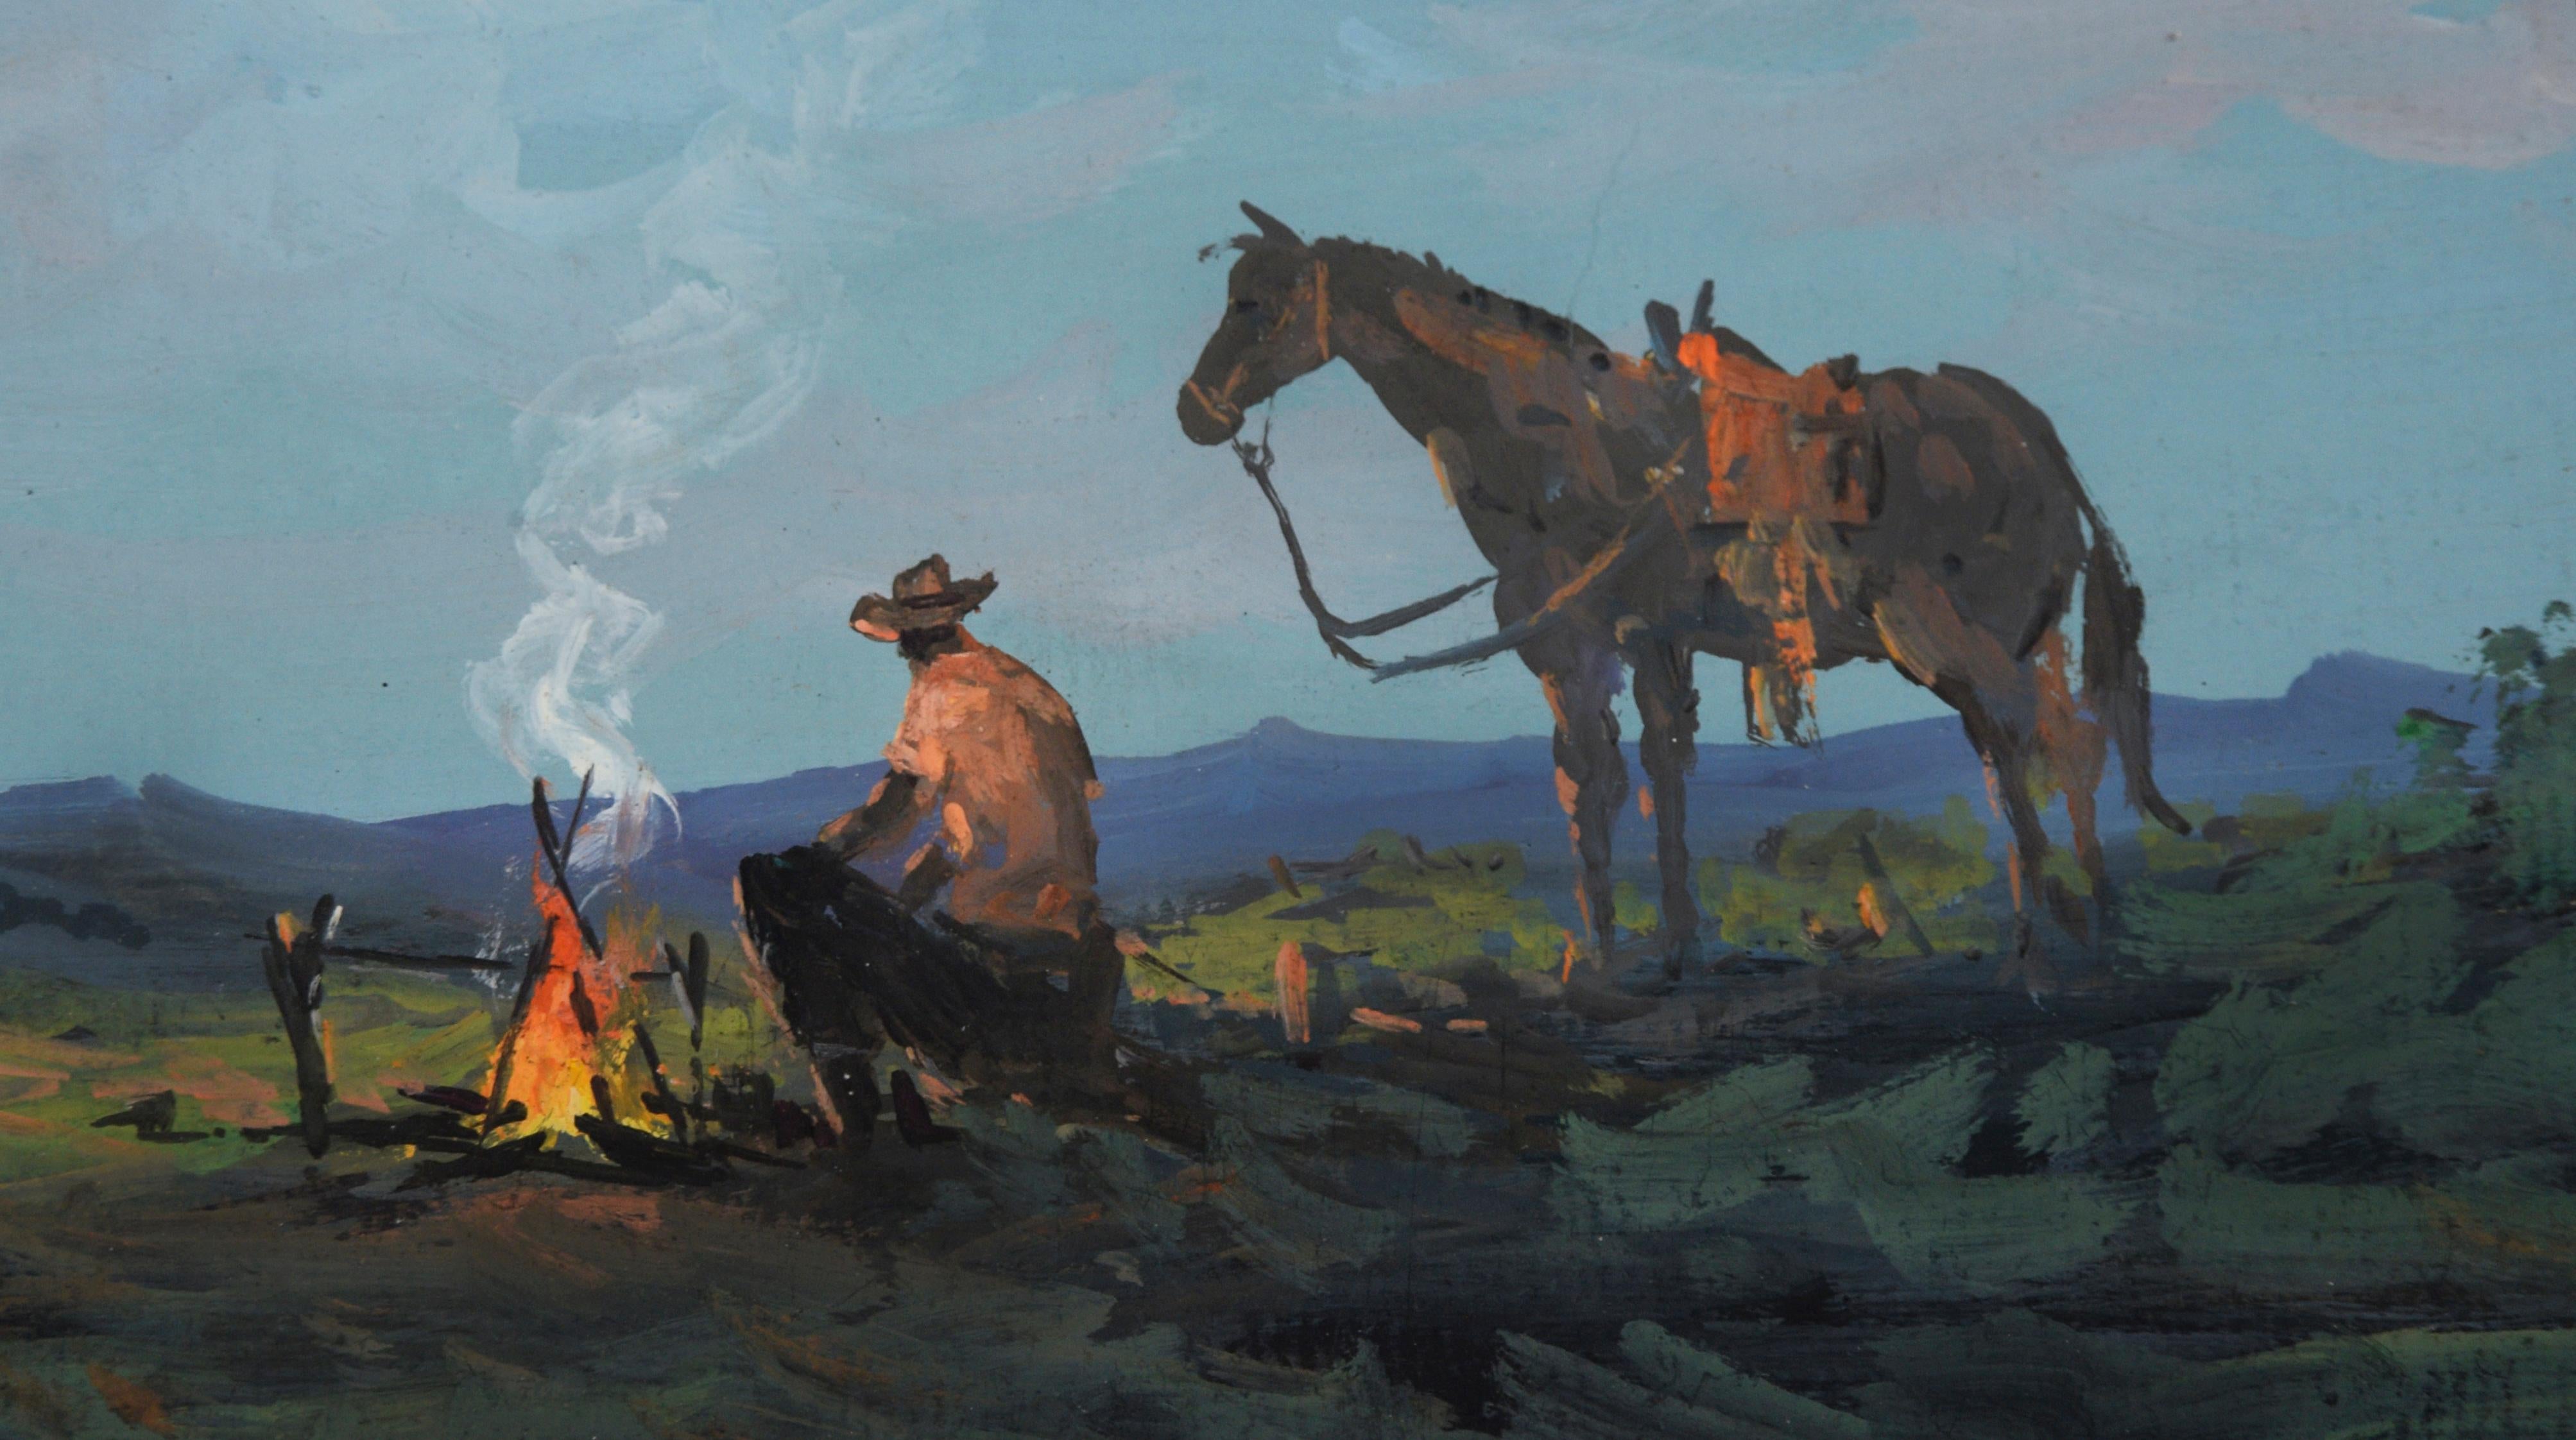 A Cowboy And His Horse - Gouache On Paper

Gouache on paper painting depicting a cowboy and his horse by a campfire by Reinaldo Manzke (Brazilian, 1906-1980). A cowboy is seen sitting by a fire while his horse stands to the right of him. Oranges and